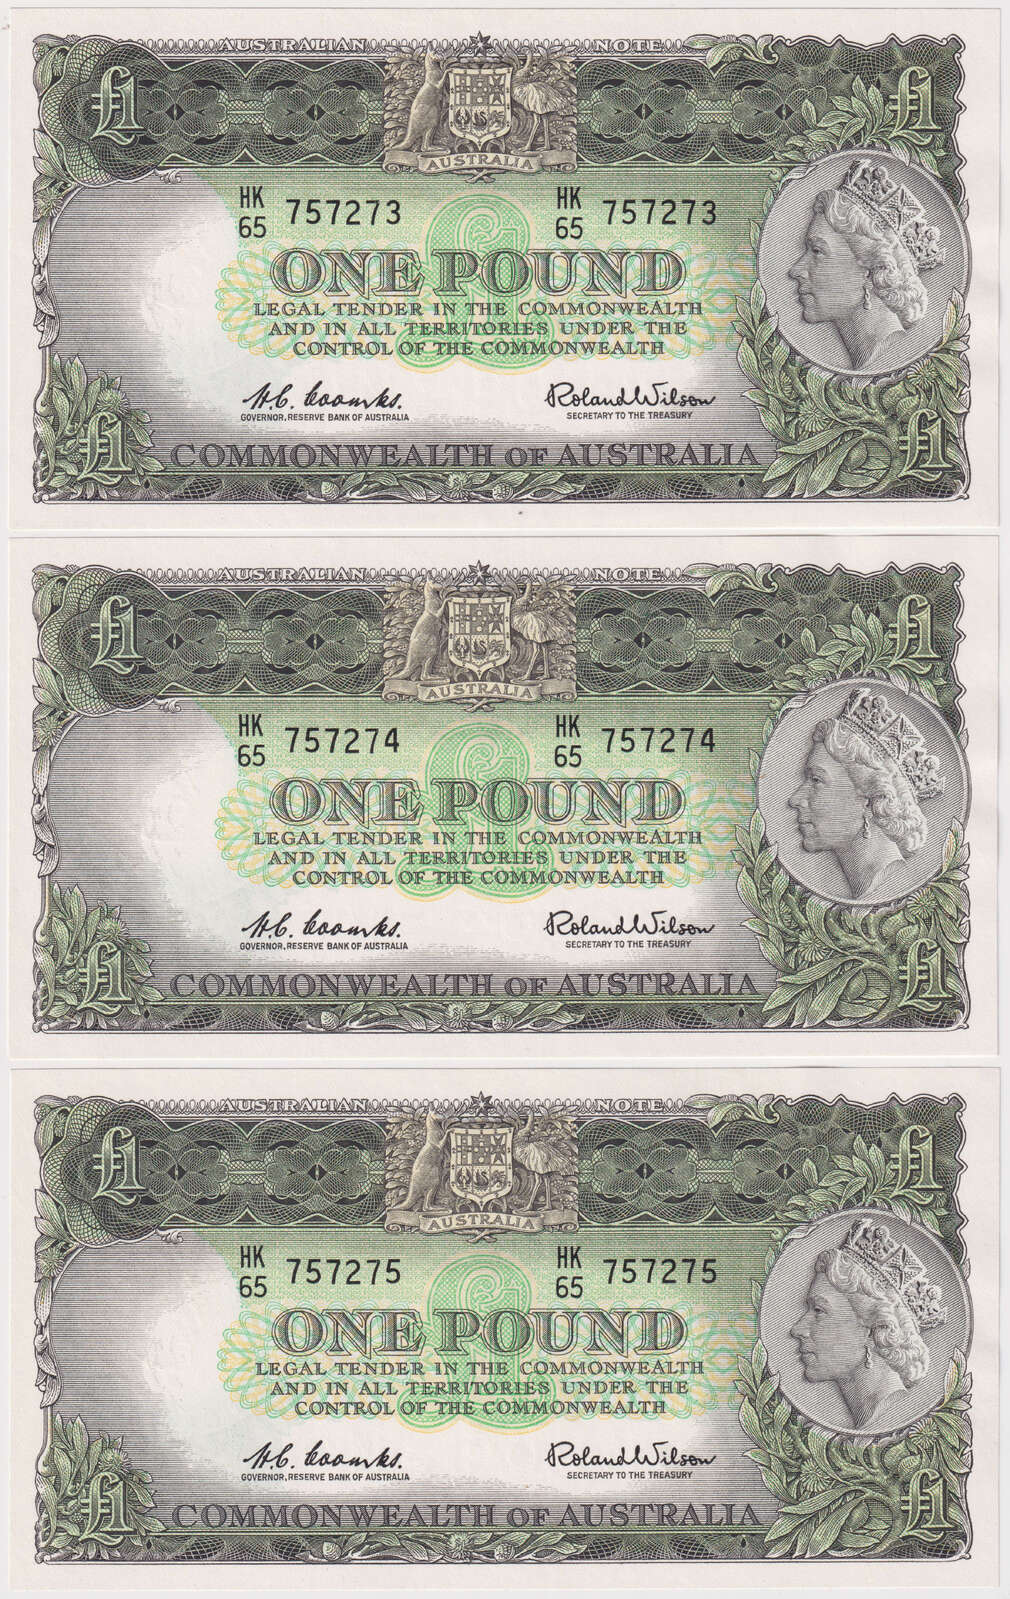 1961 One Pound Consecutive Trio Last Prefix HK/65 Coombs/Wilson R34bL Uncirculated product image